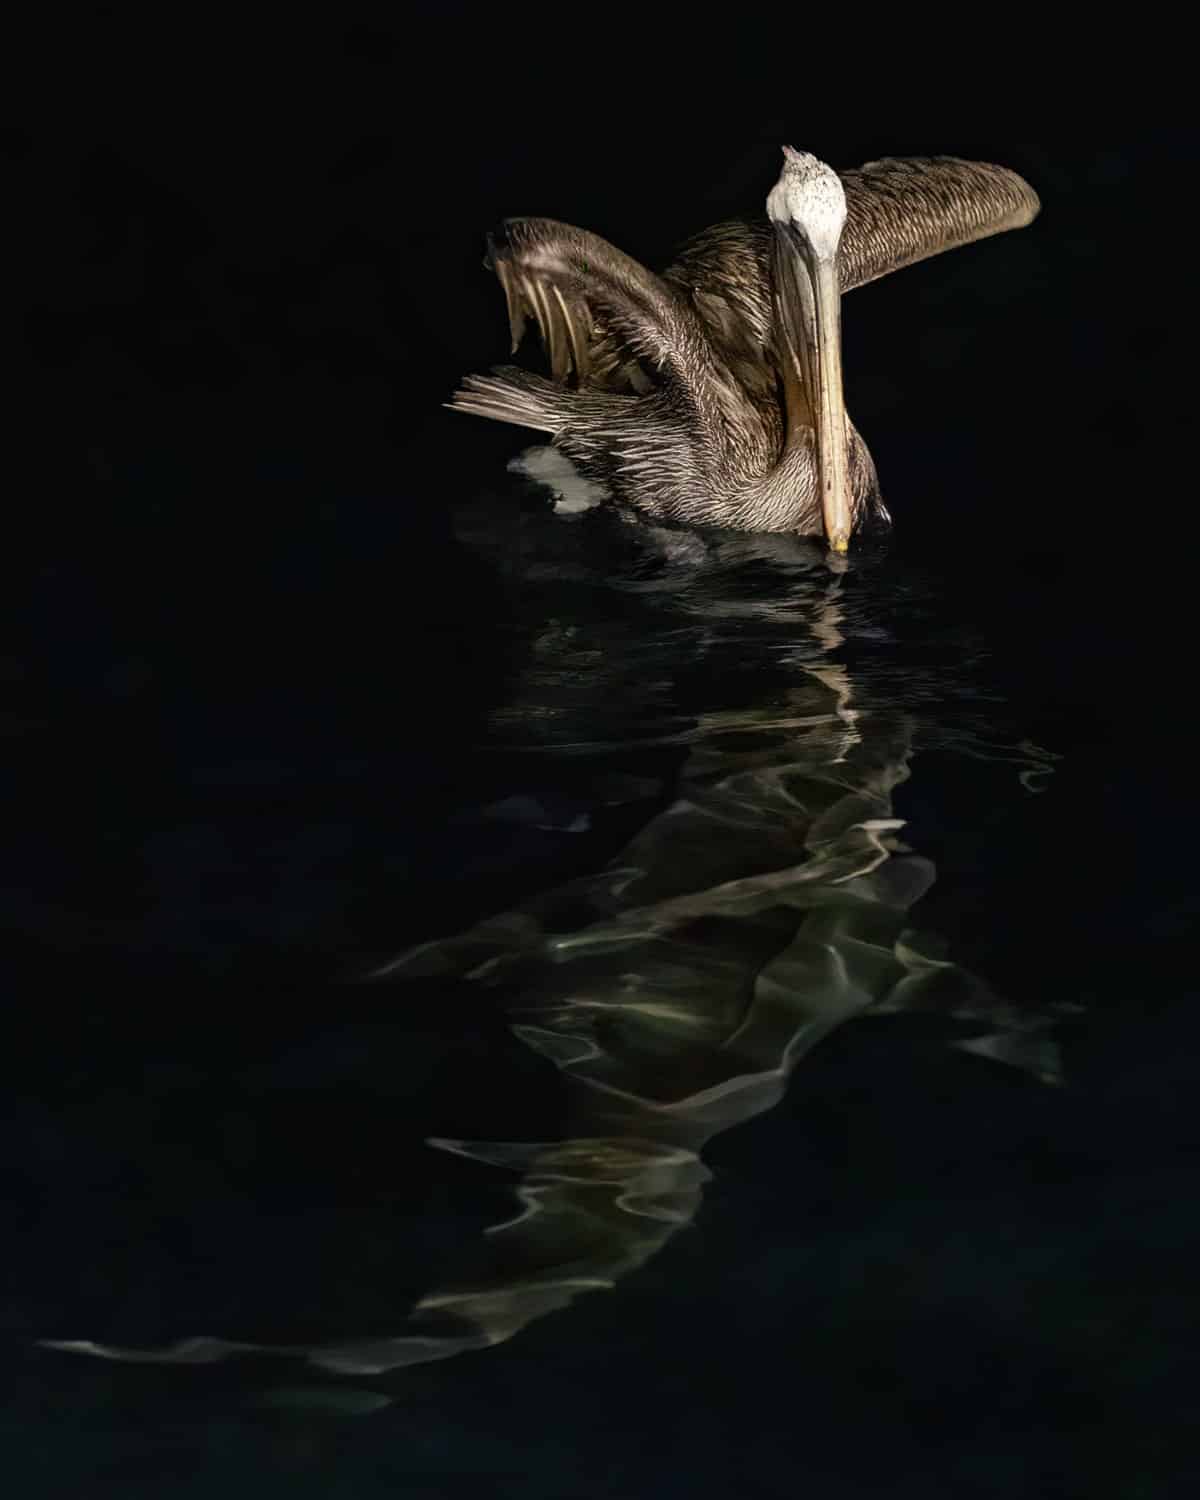 Brown pelican on the water with shark swimming below